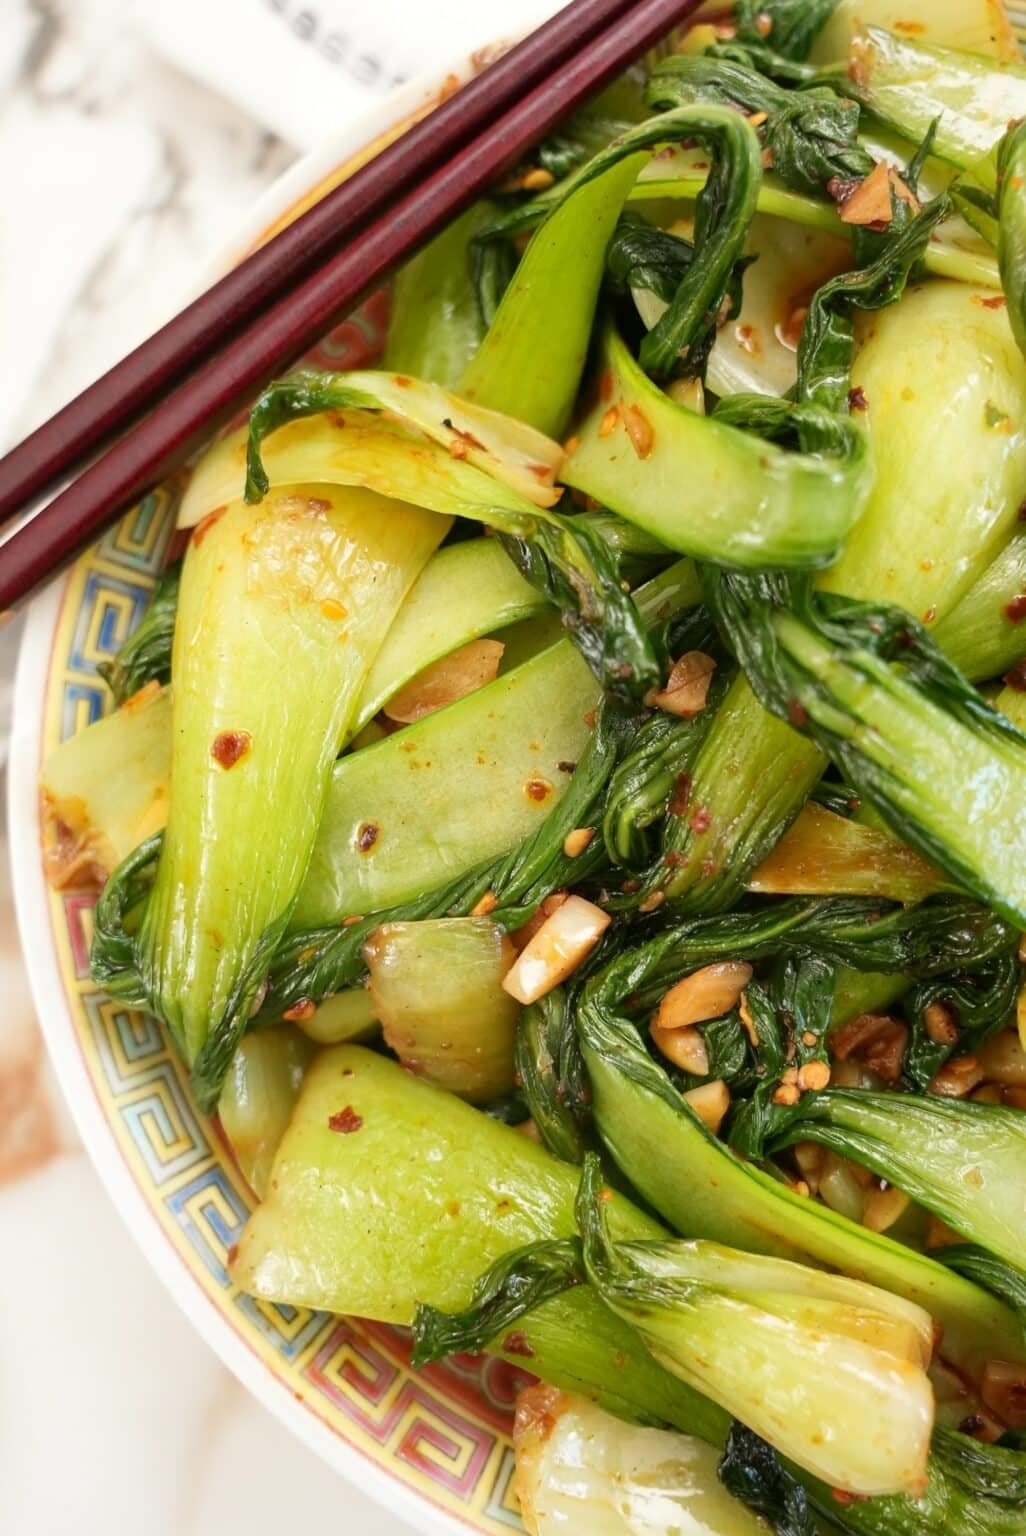 Plate of stir-fried bok choy with garlic and chili flakes